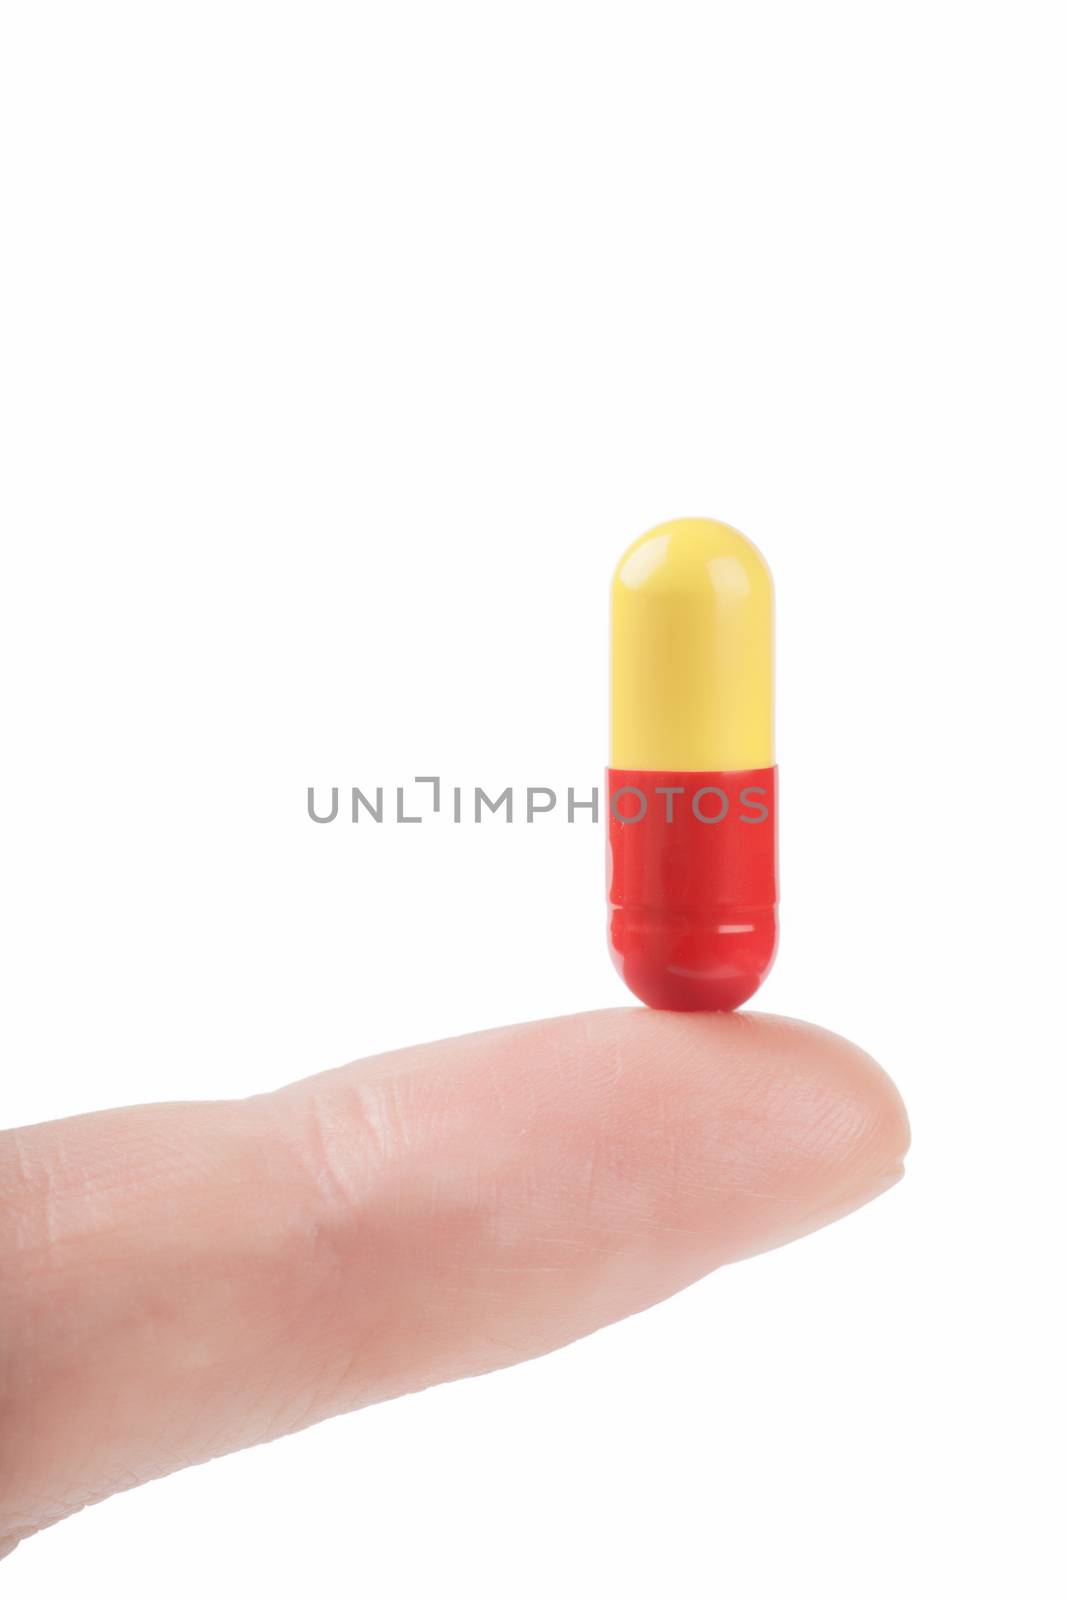 Closeup view of capsule pill on a finger isolated over white background